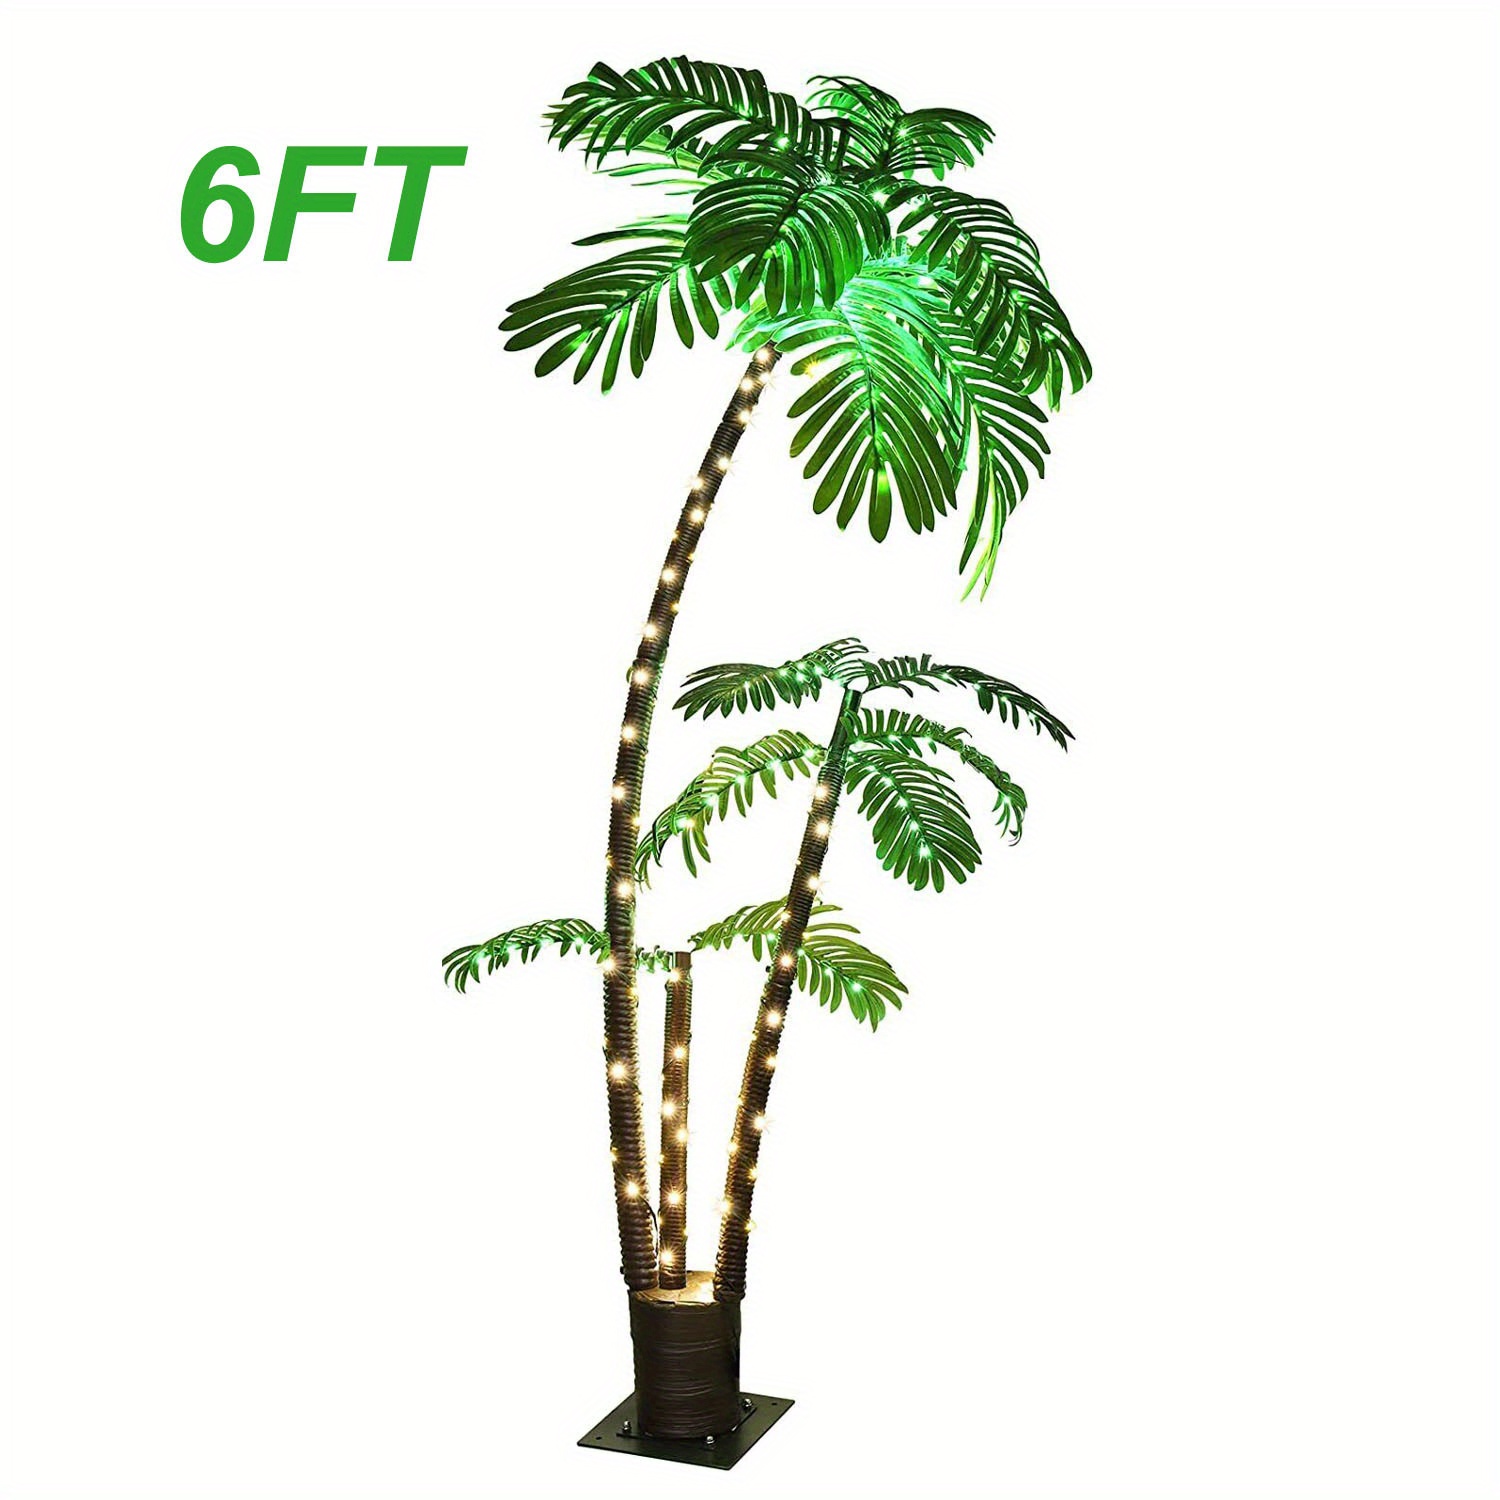 

6ft Lighted Palm Tree Artificial Palm Tree Decor For Outdoor, Fake Tree With 8 Different Lighting Modes For Patio, Yard, Garden, Pool Beach, Hawaiian Bar, Tropical Party